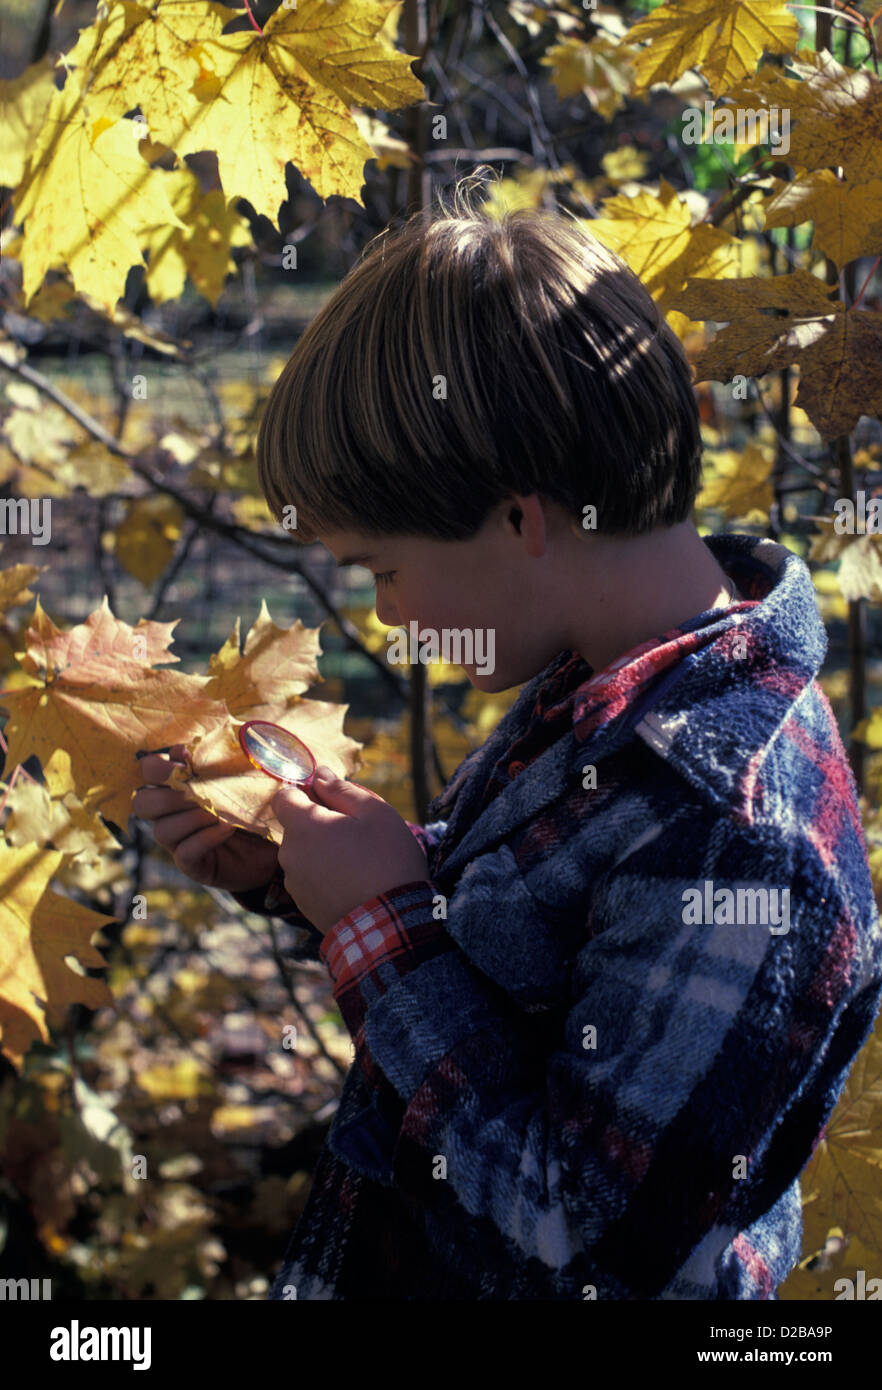 Boy Studying Fall Leaves With Magnifying Glass Stock Photo